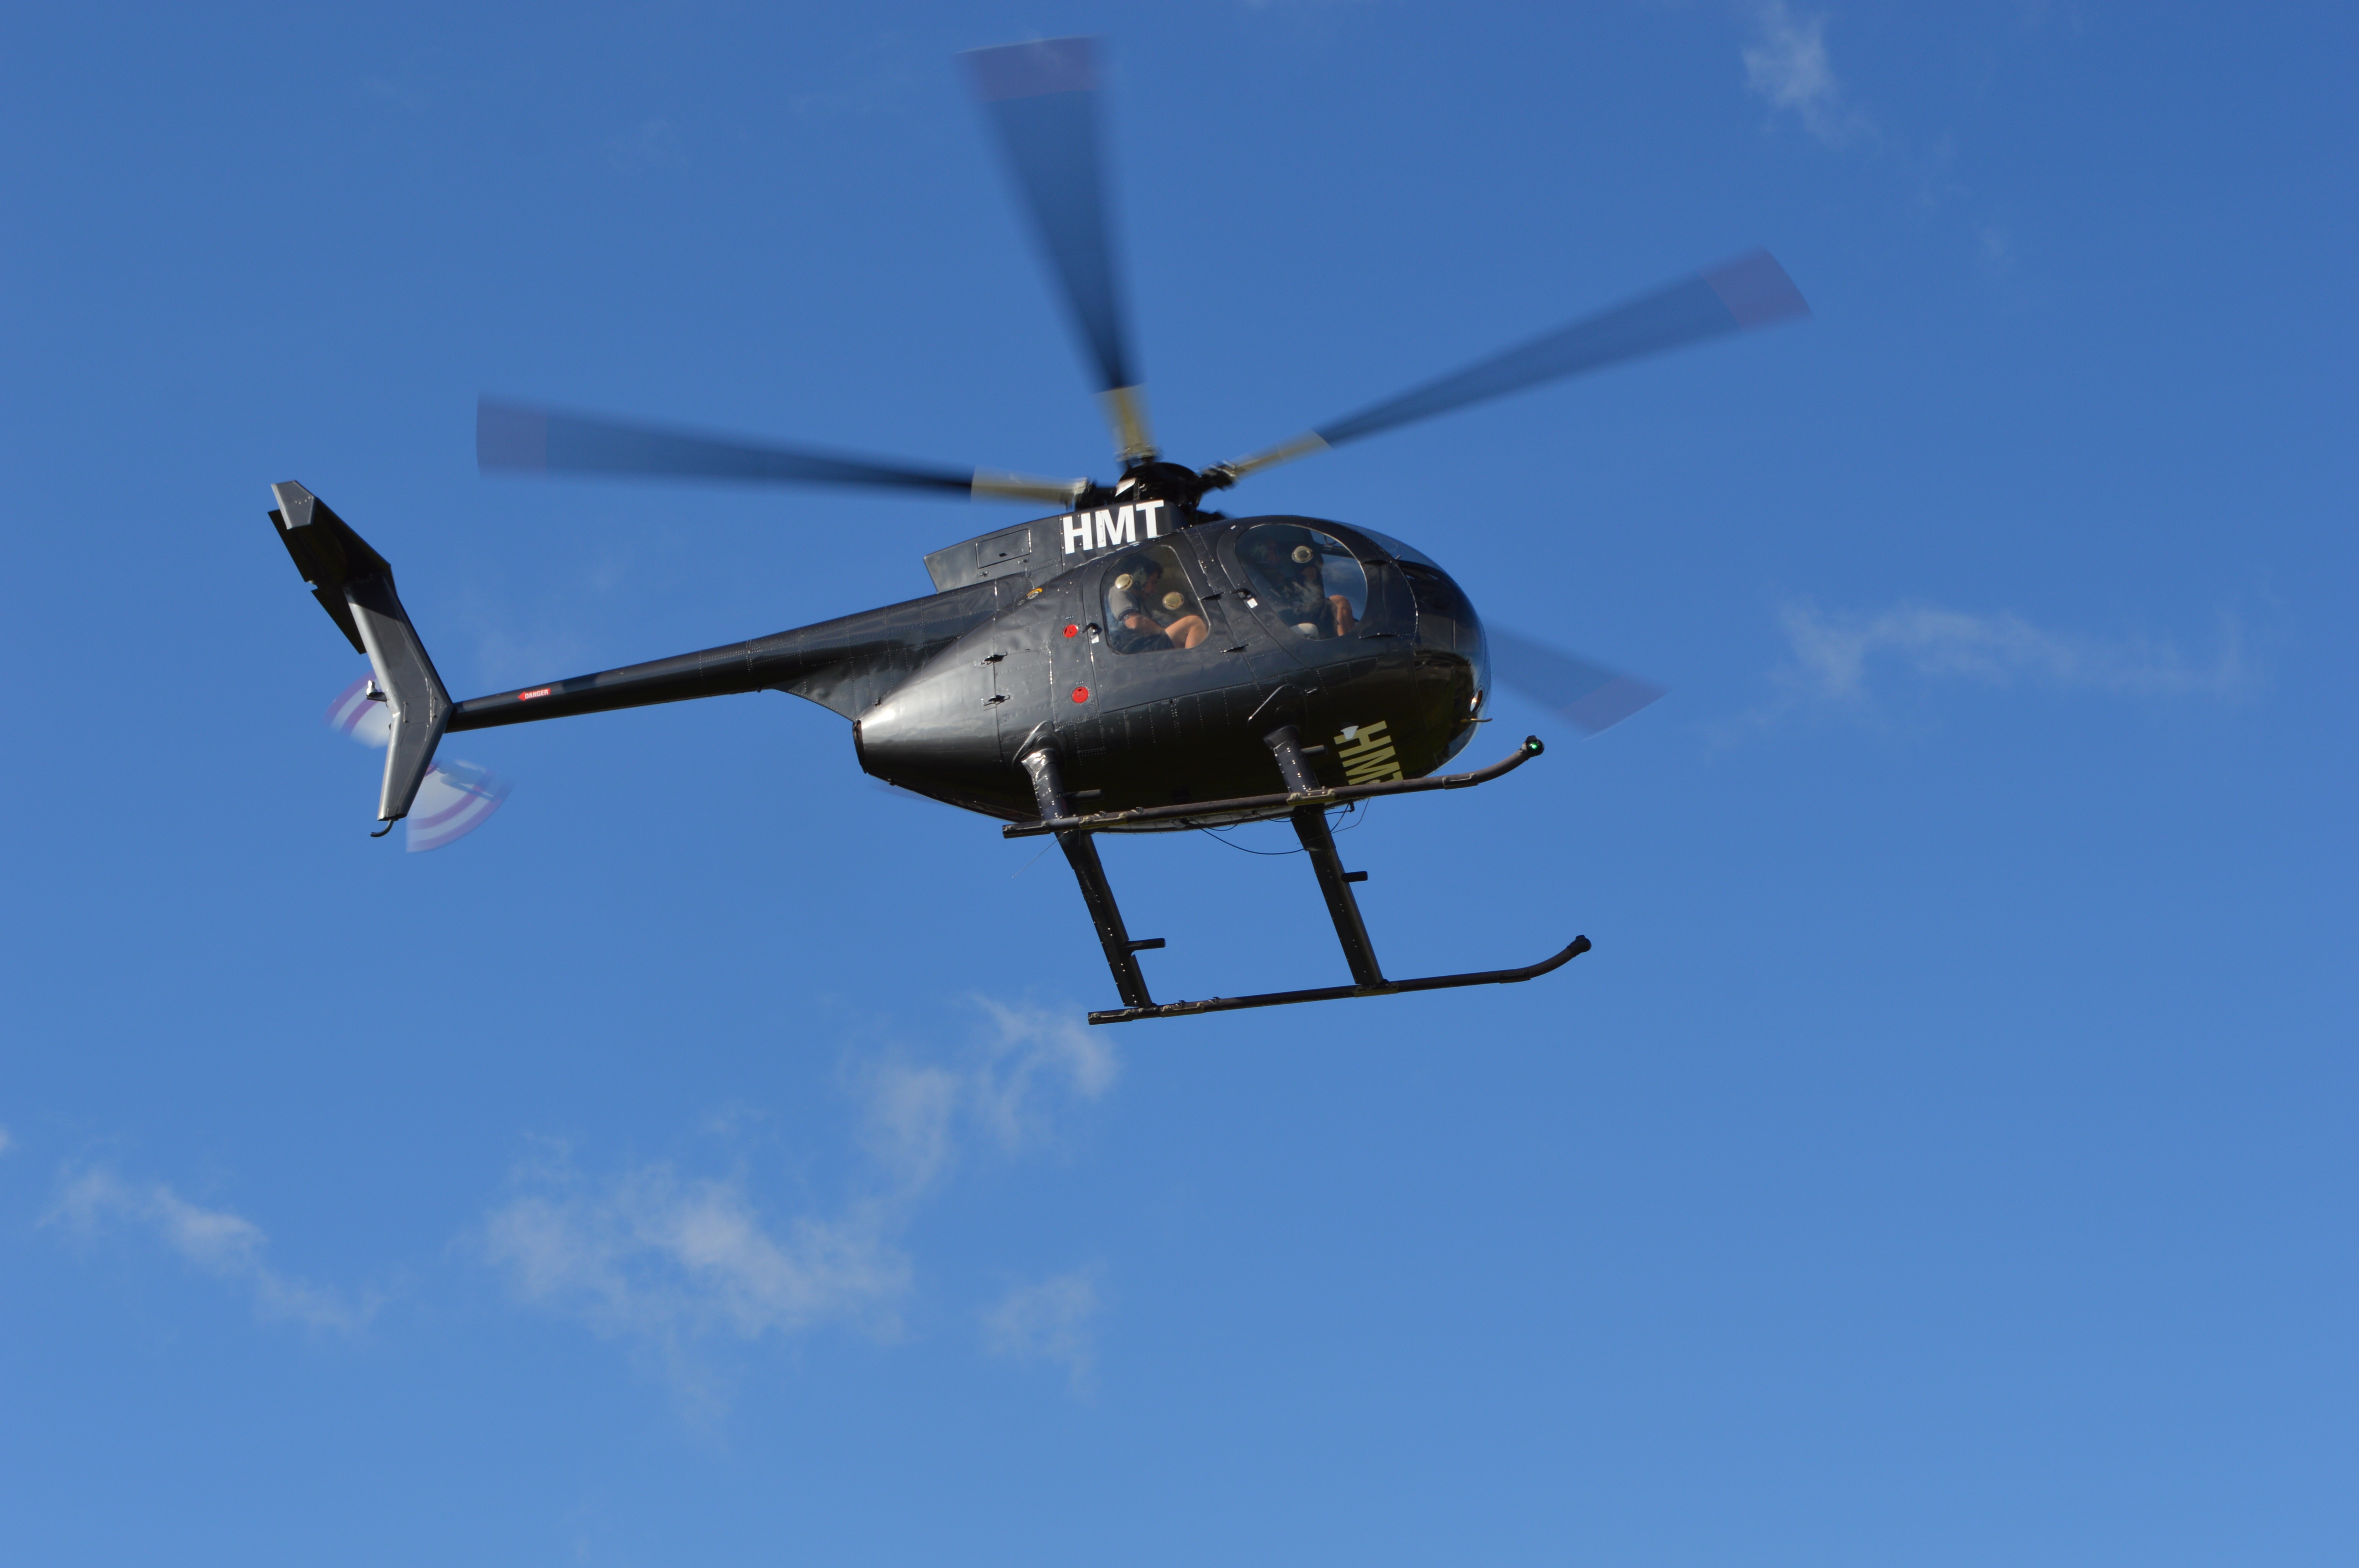 MD Helicopter in flight